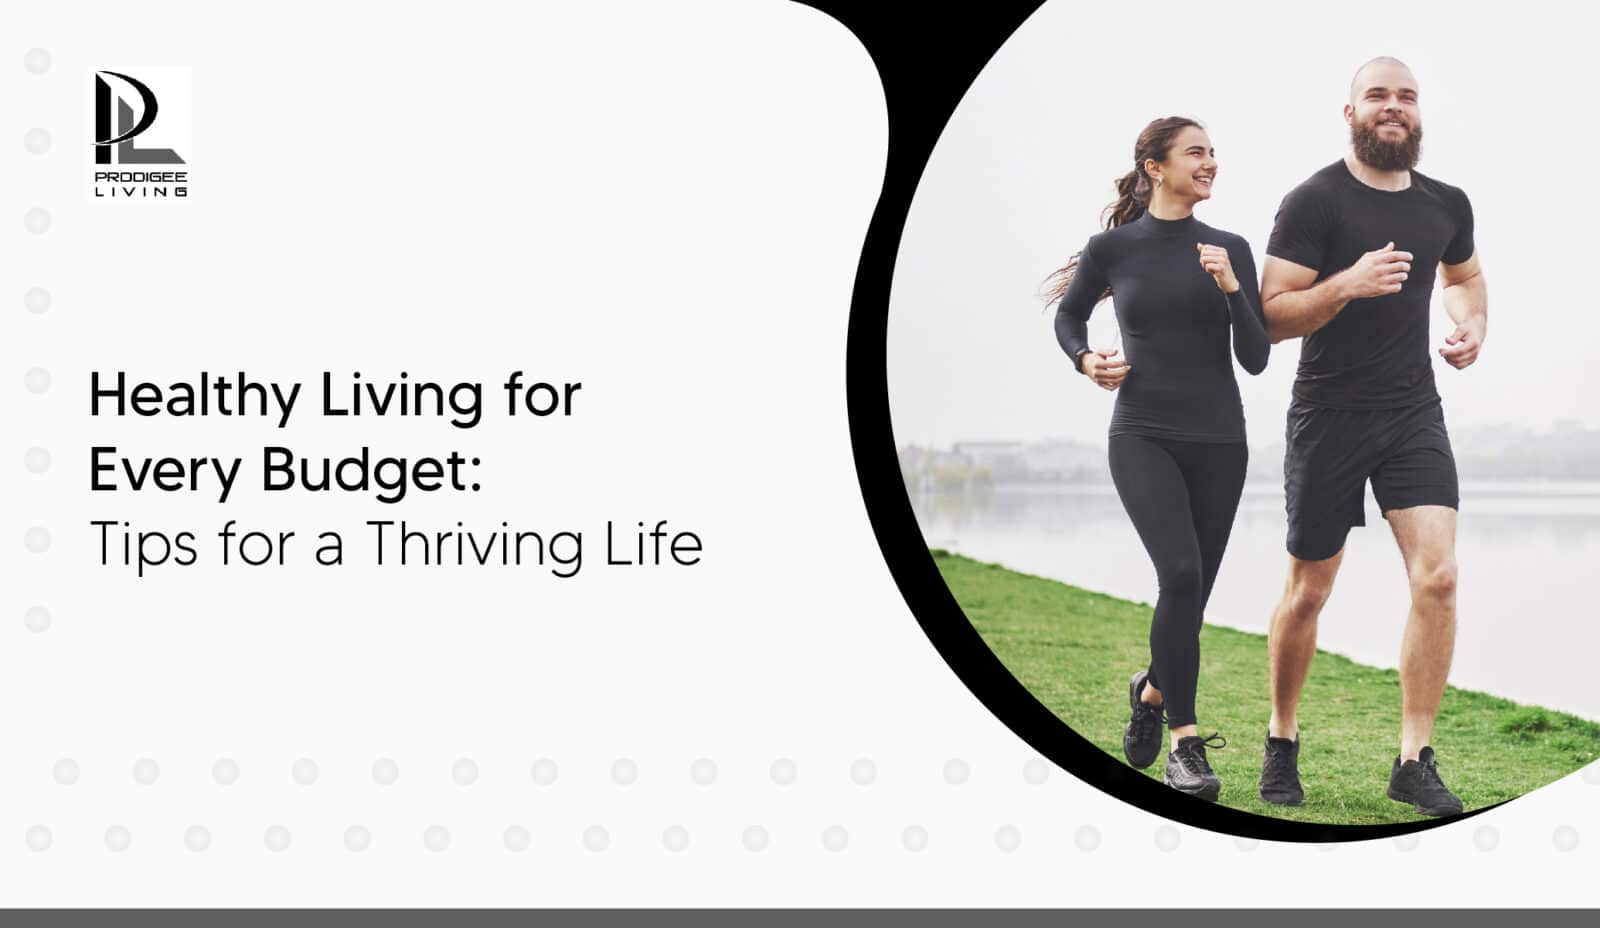 health living for every budget: tips for a thriving life